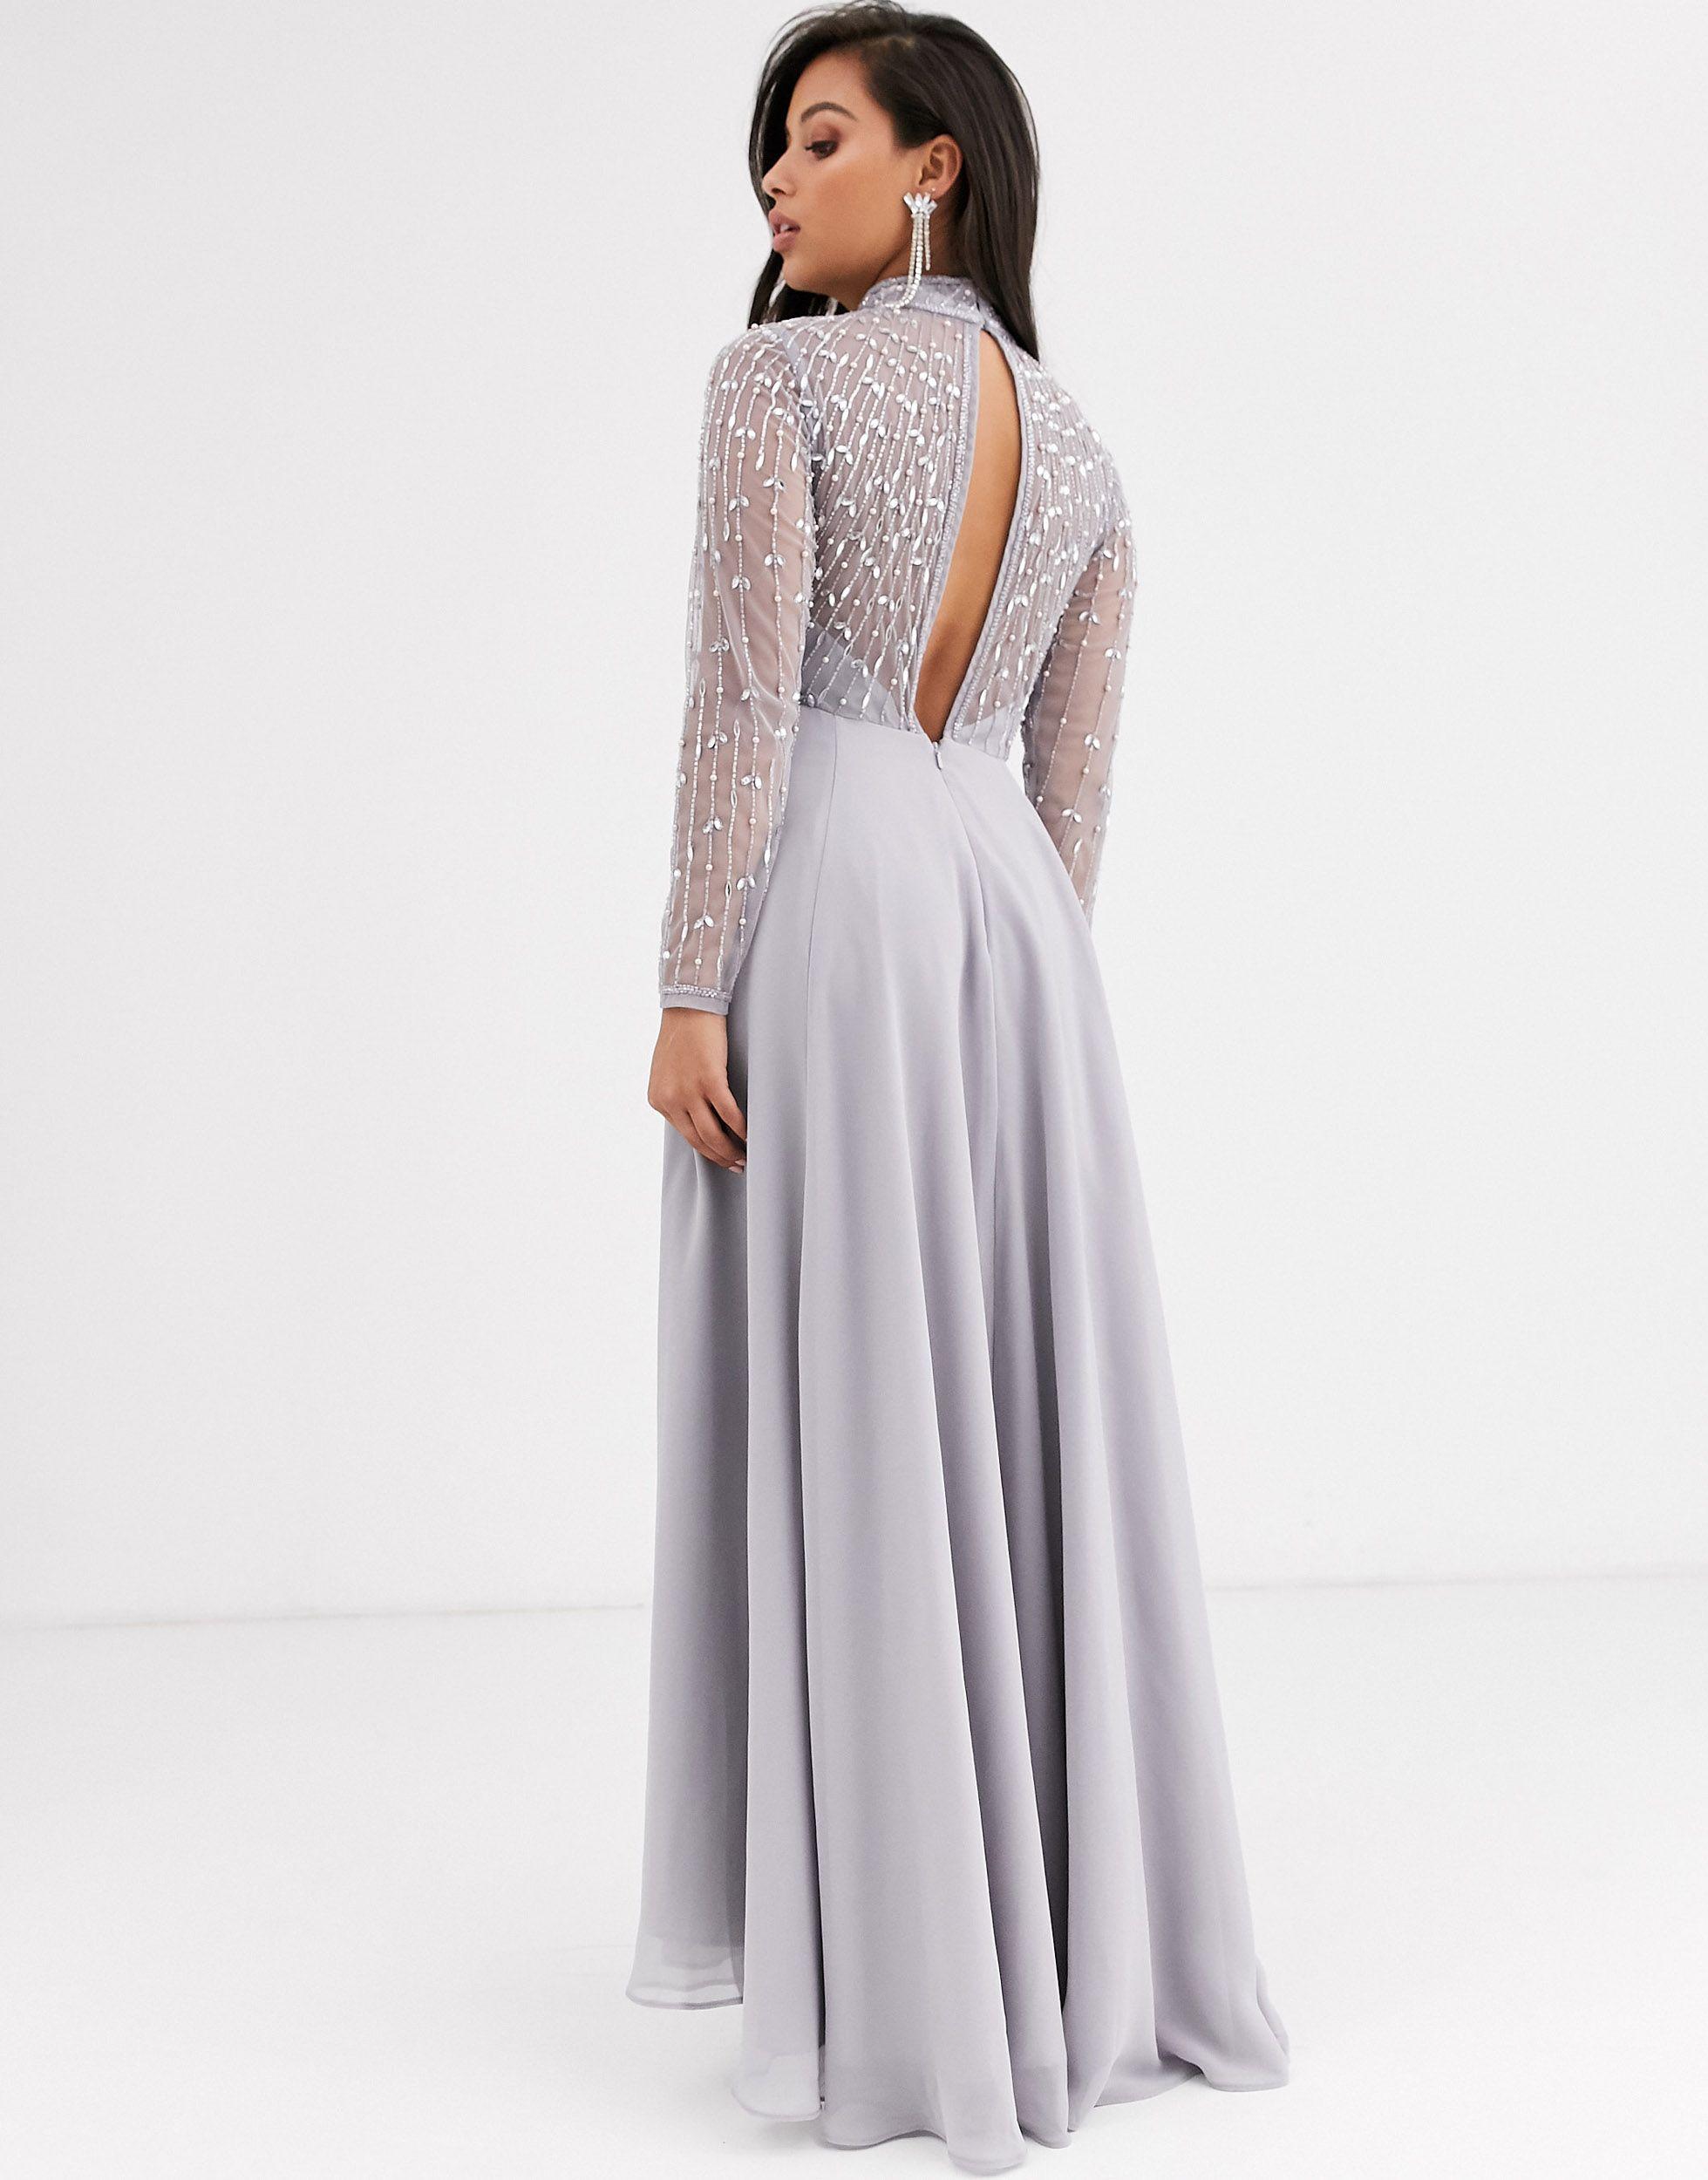 ASOS Chiffon Asos Design Petite Maxi Dress With Linear Embellished Bodice  And Wrap Skirt - Lyst